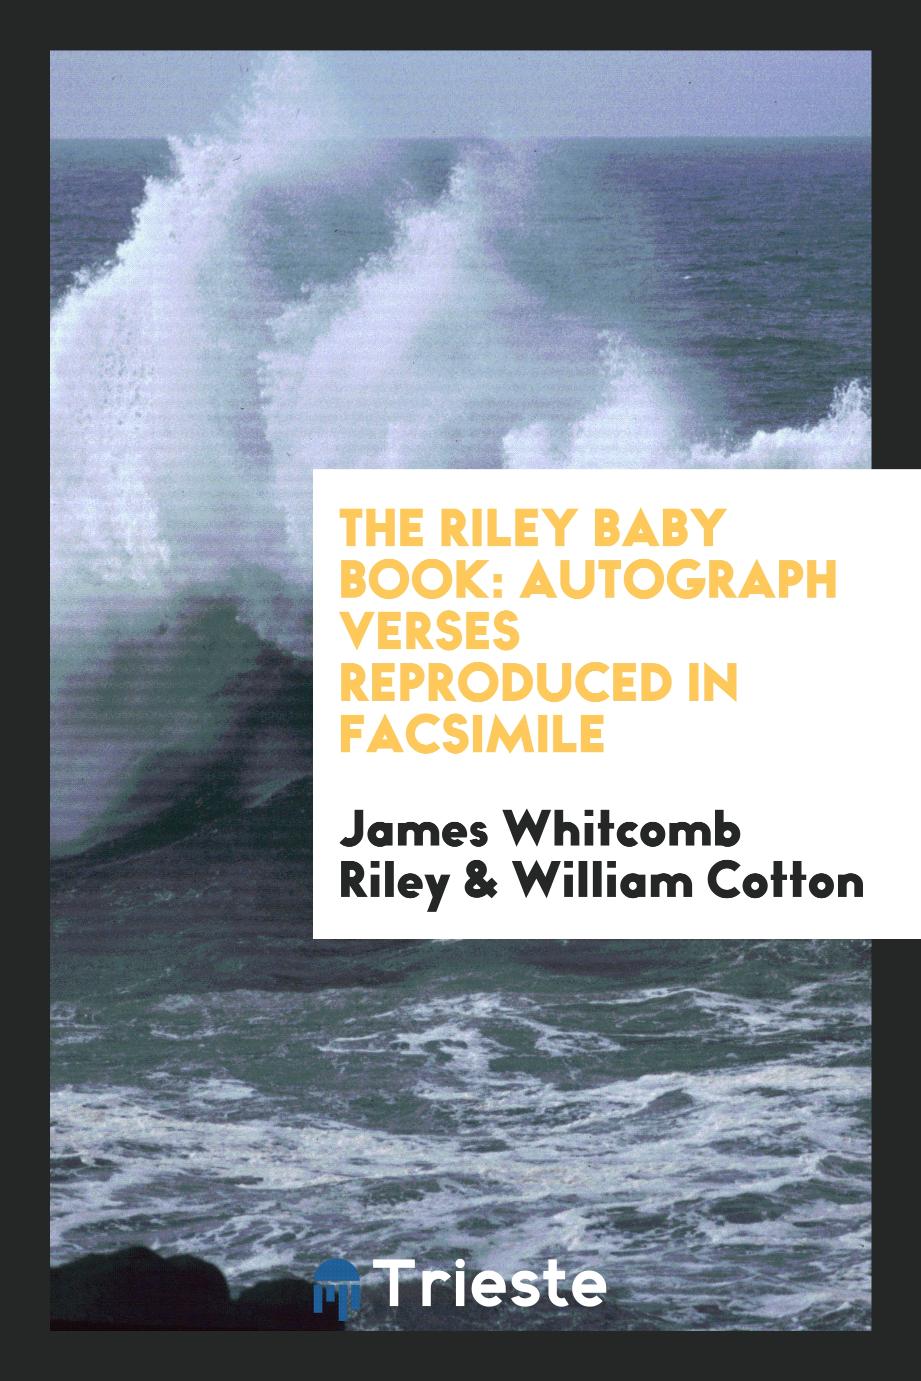 The Riley baby book: autograph verses reproduced in facsimile